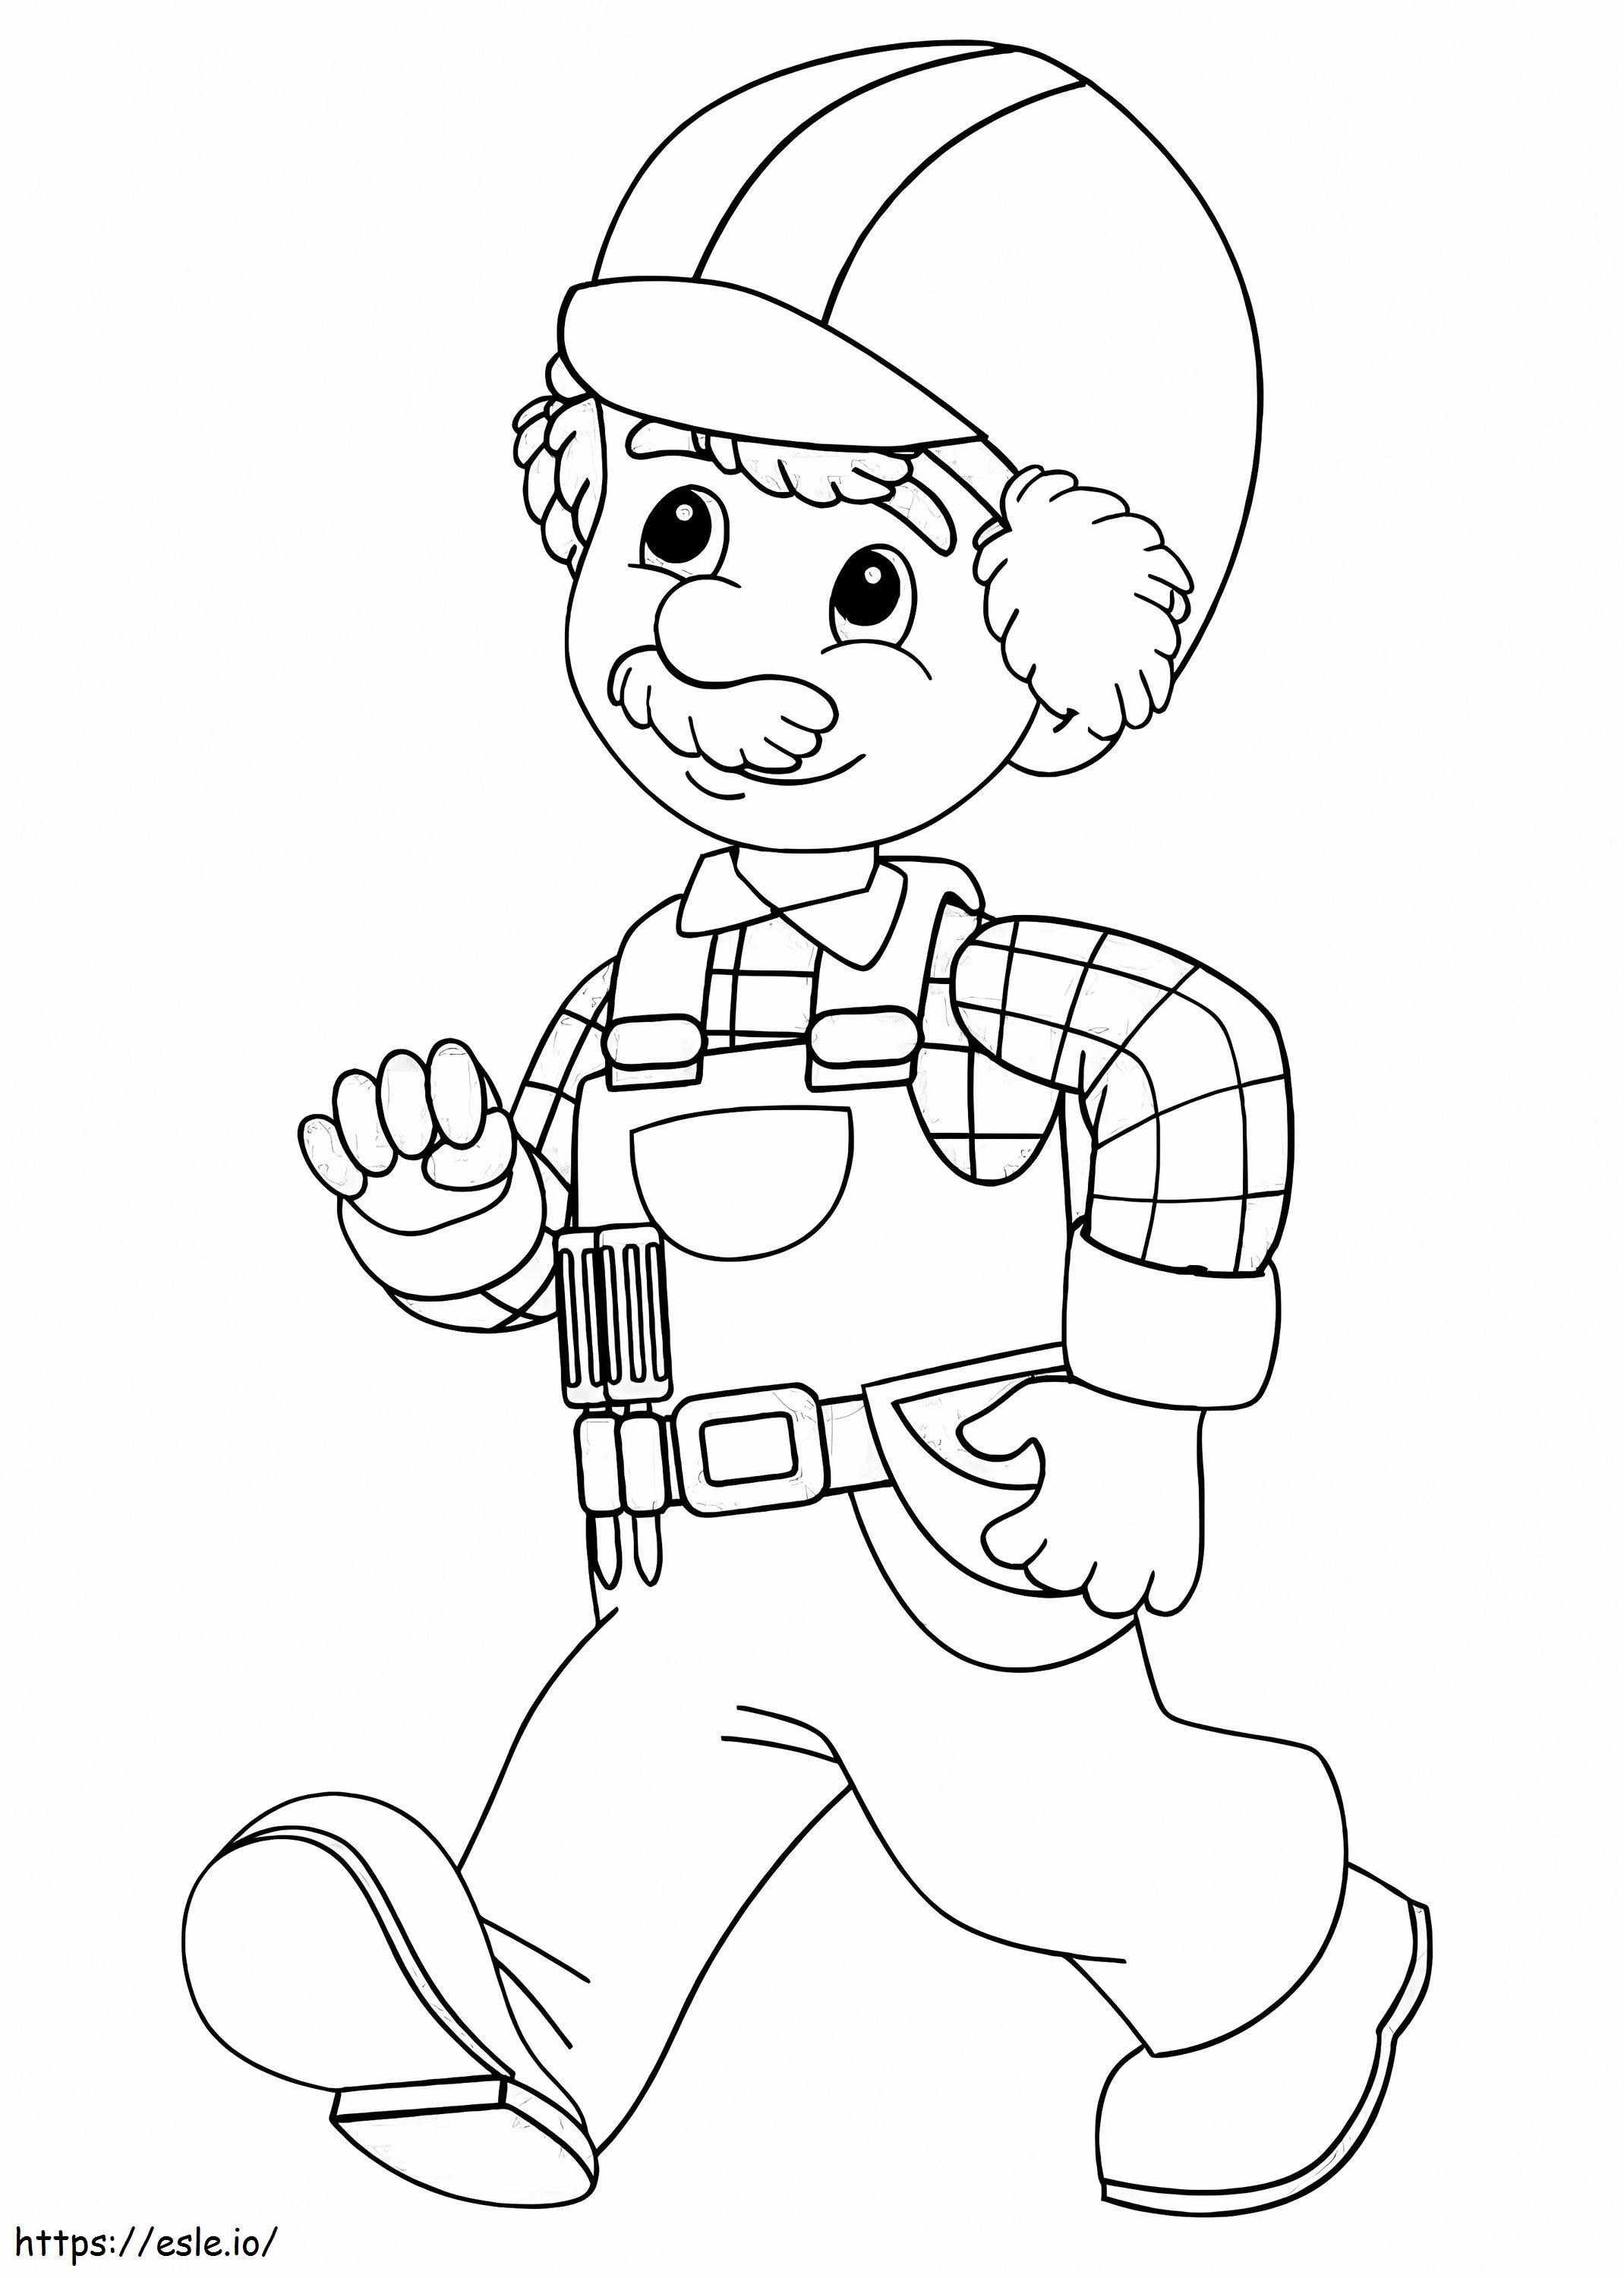 Old Construction Worker coloring page